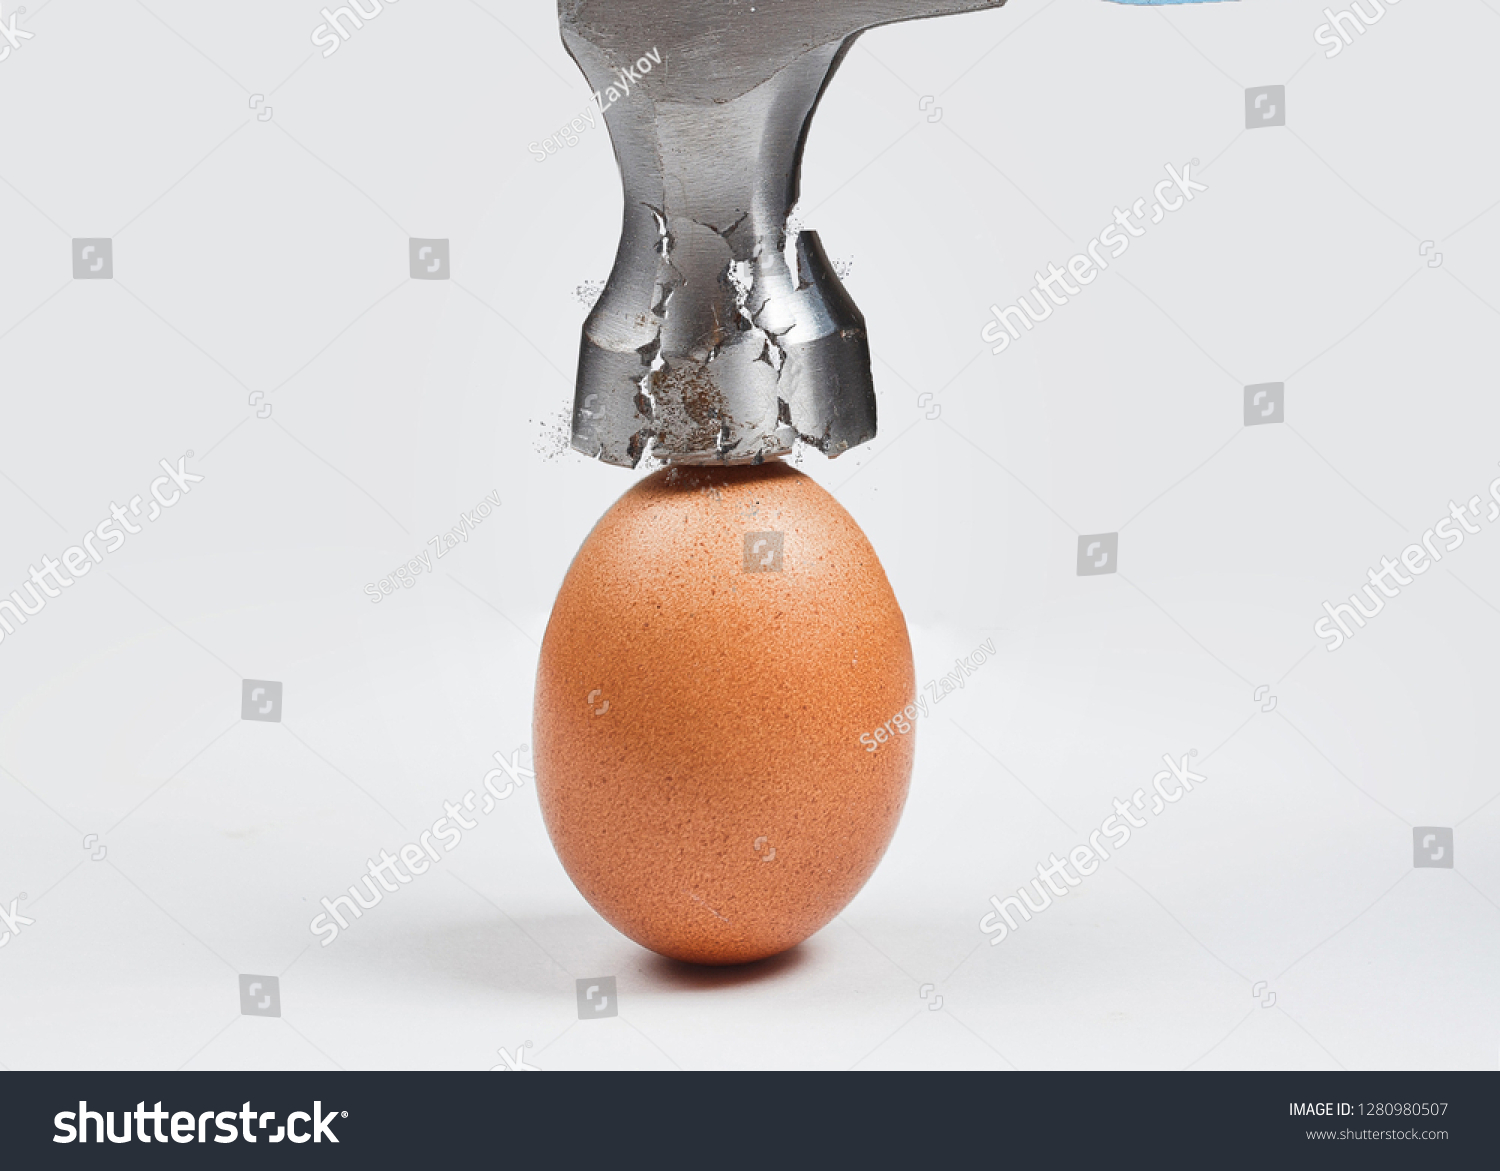 Hammer is breaking chicken egg. Concept of strength, durability, stress resistance and fortitude. #1280980507